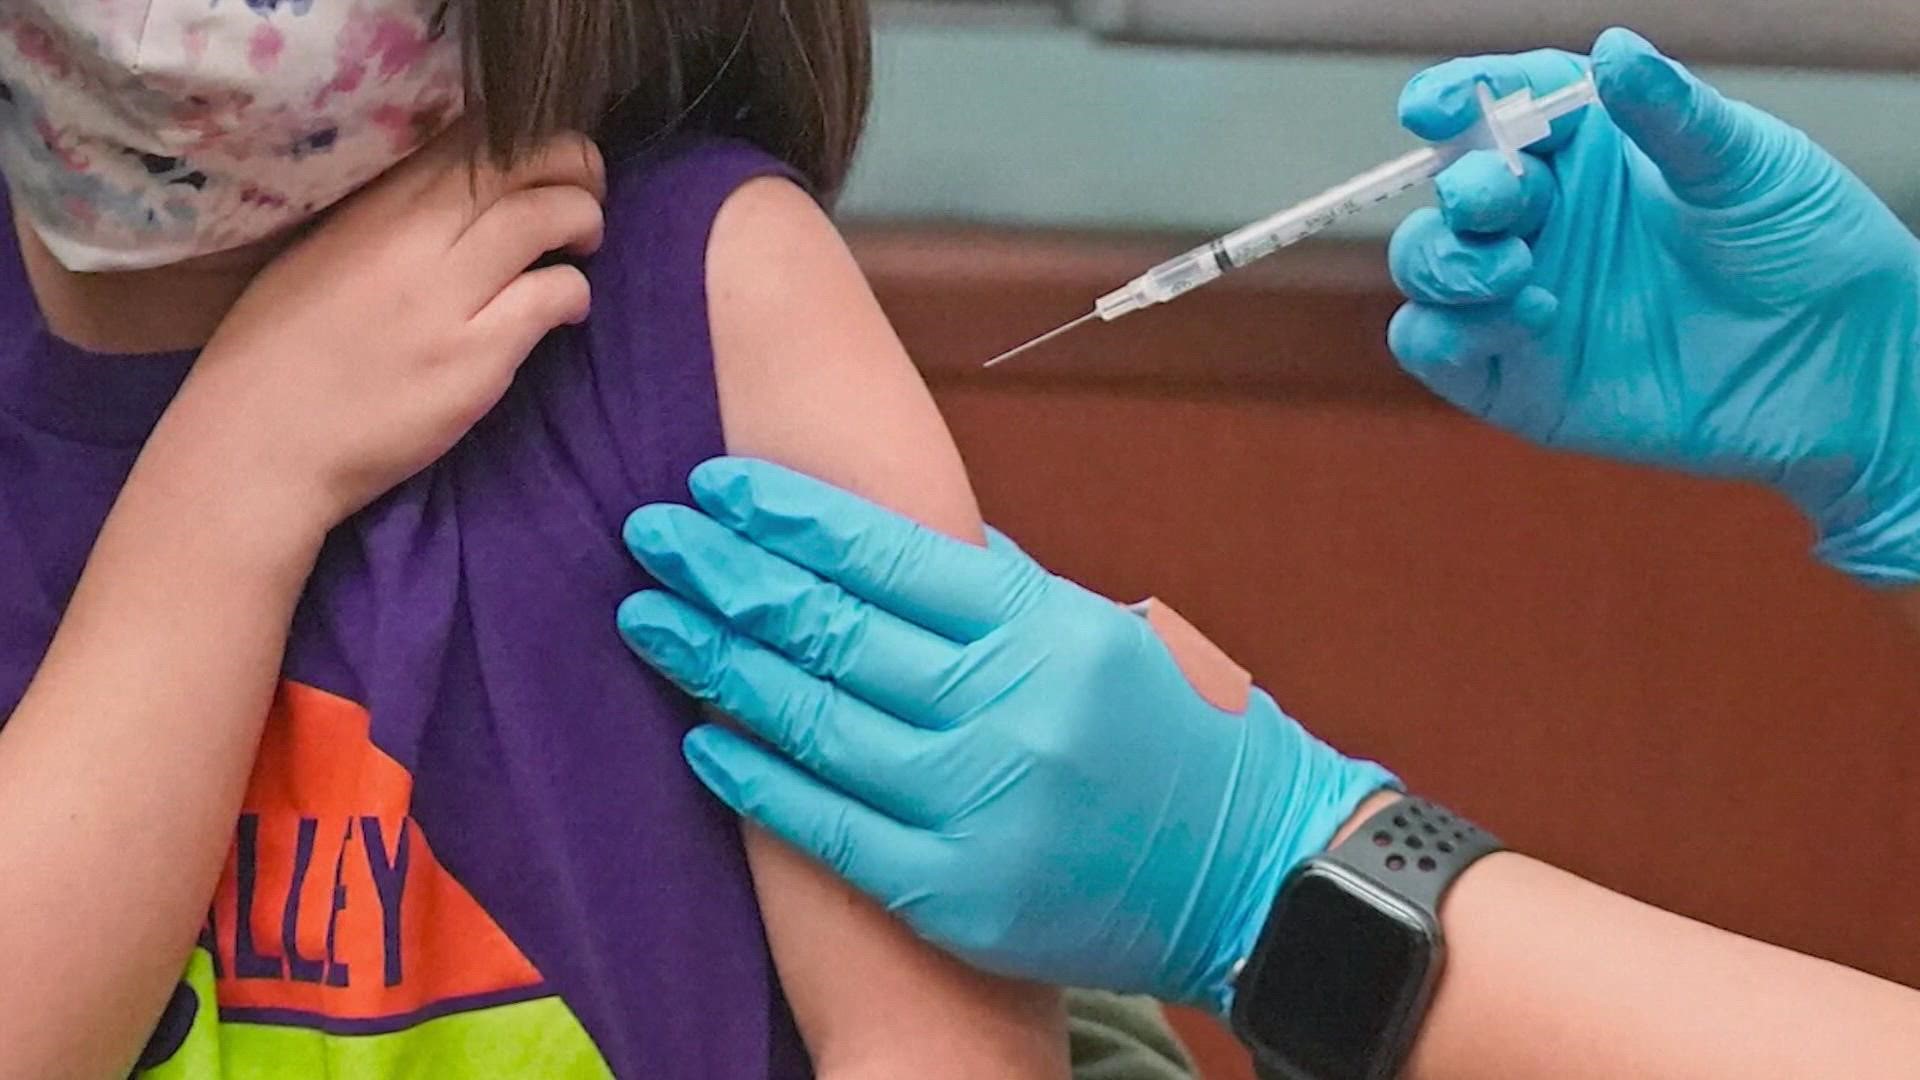 Here are some of the challenges officials are facing with the rollout of the vaccine for young children.